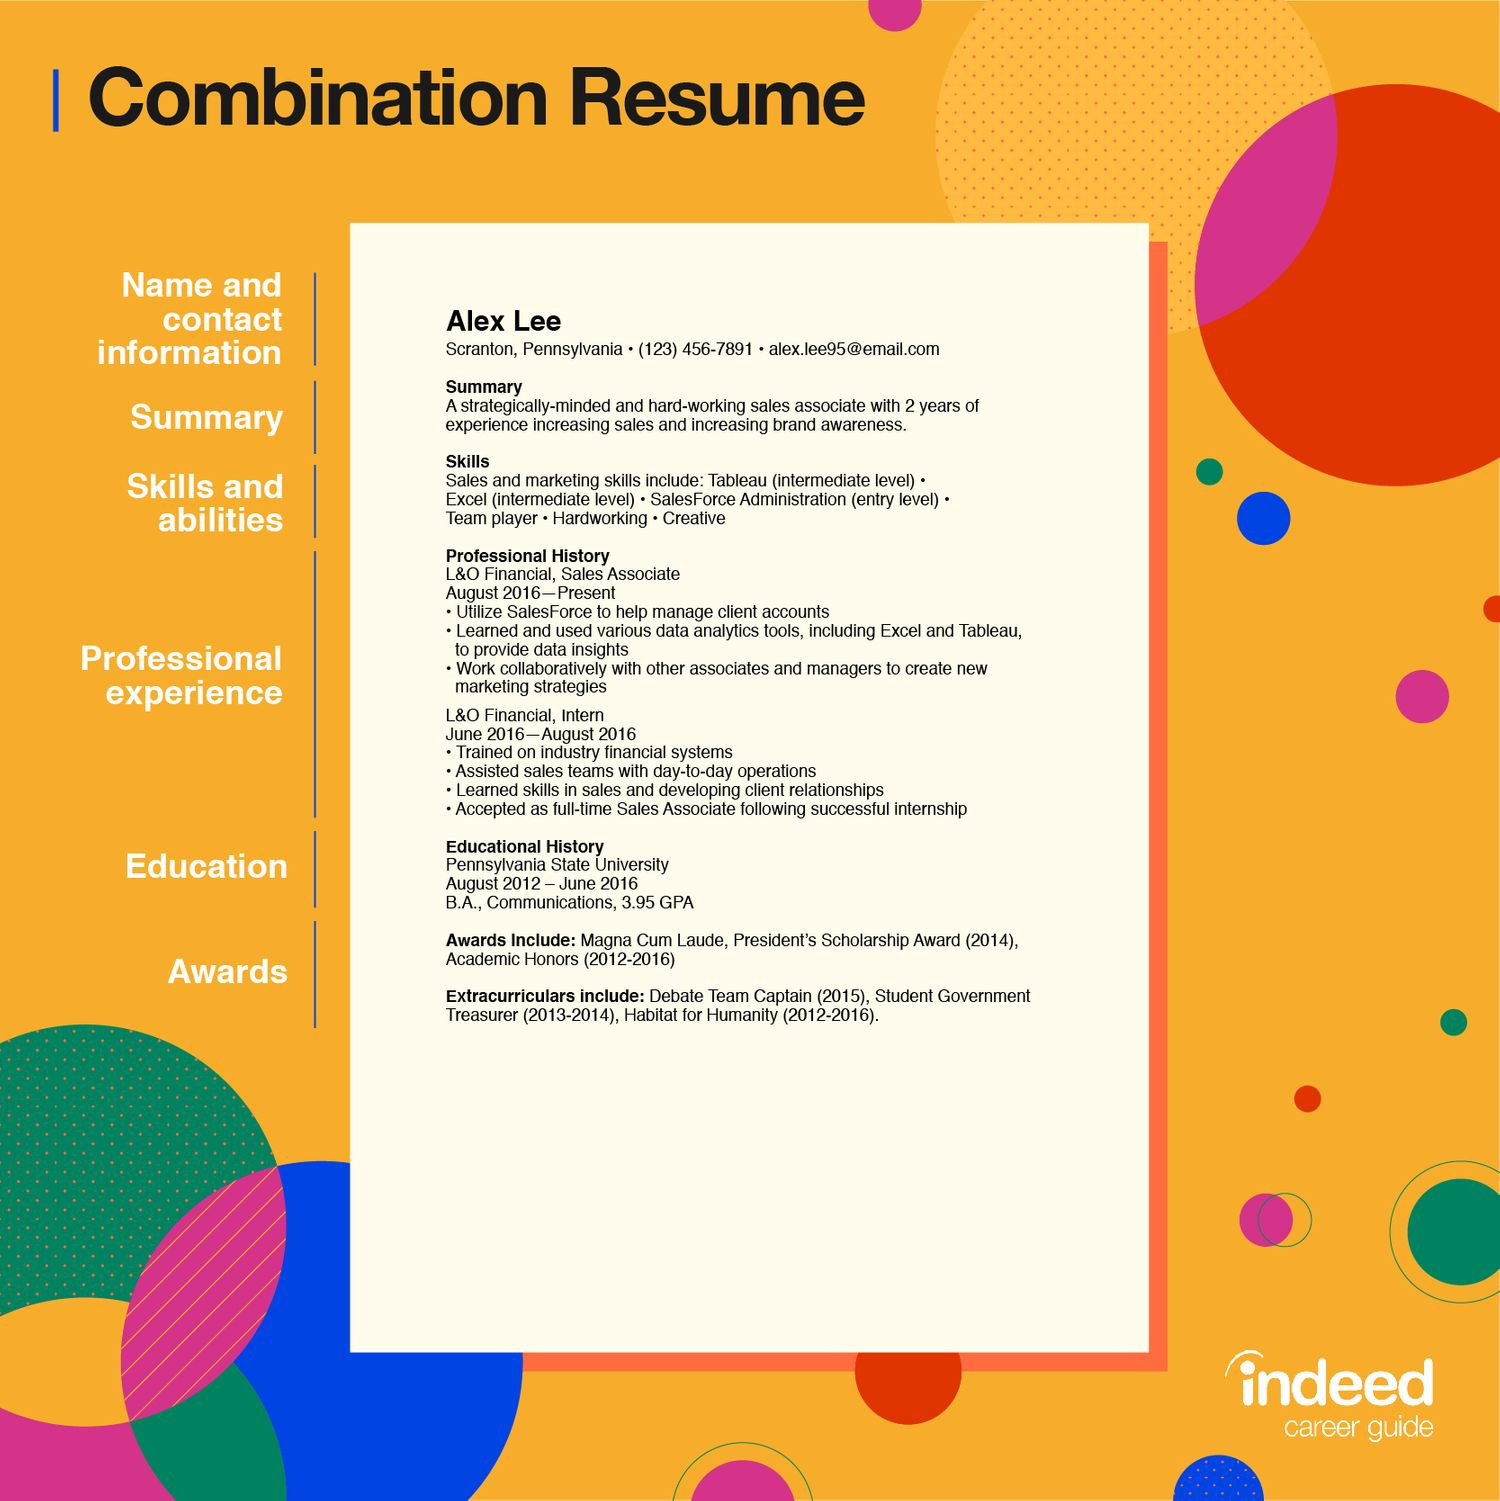 Free Sample Of Sales Representative Resume On Indeed How to Write A Sales Professional Summary (with Template) Indeed.com